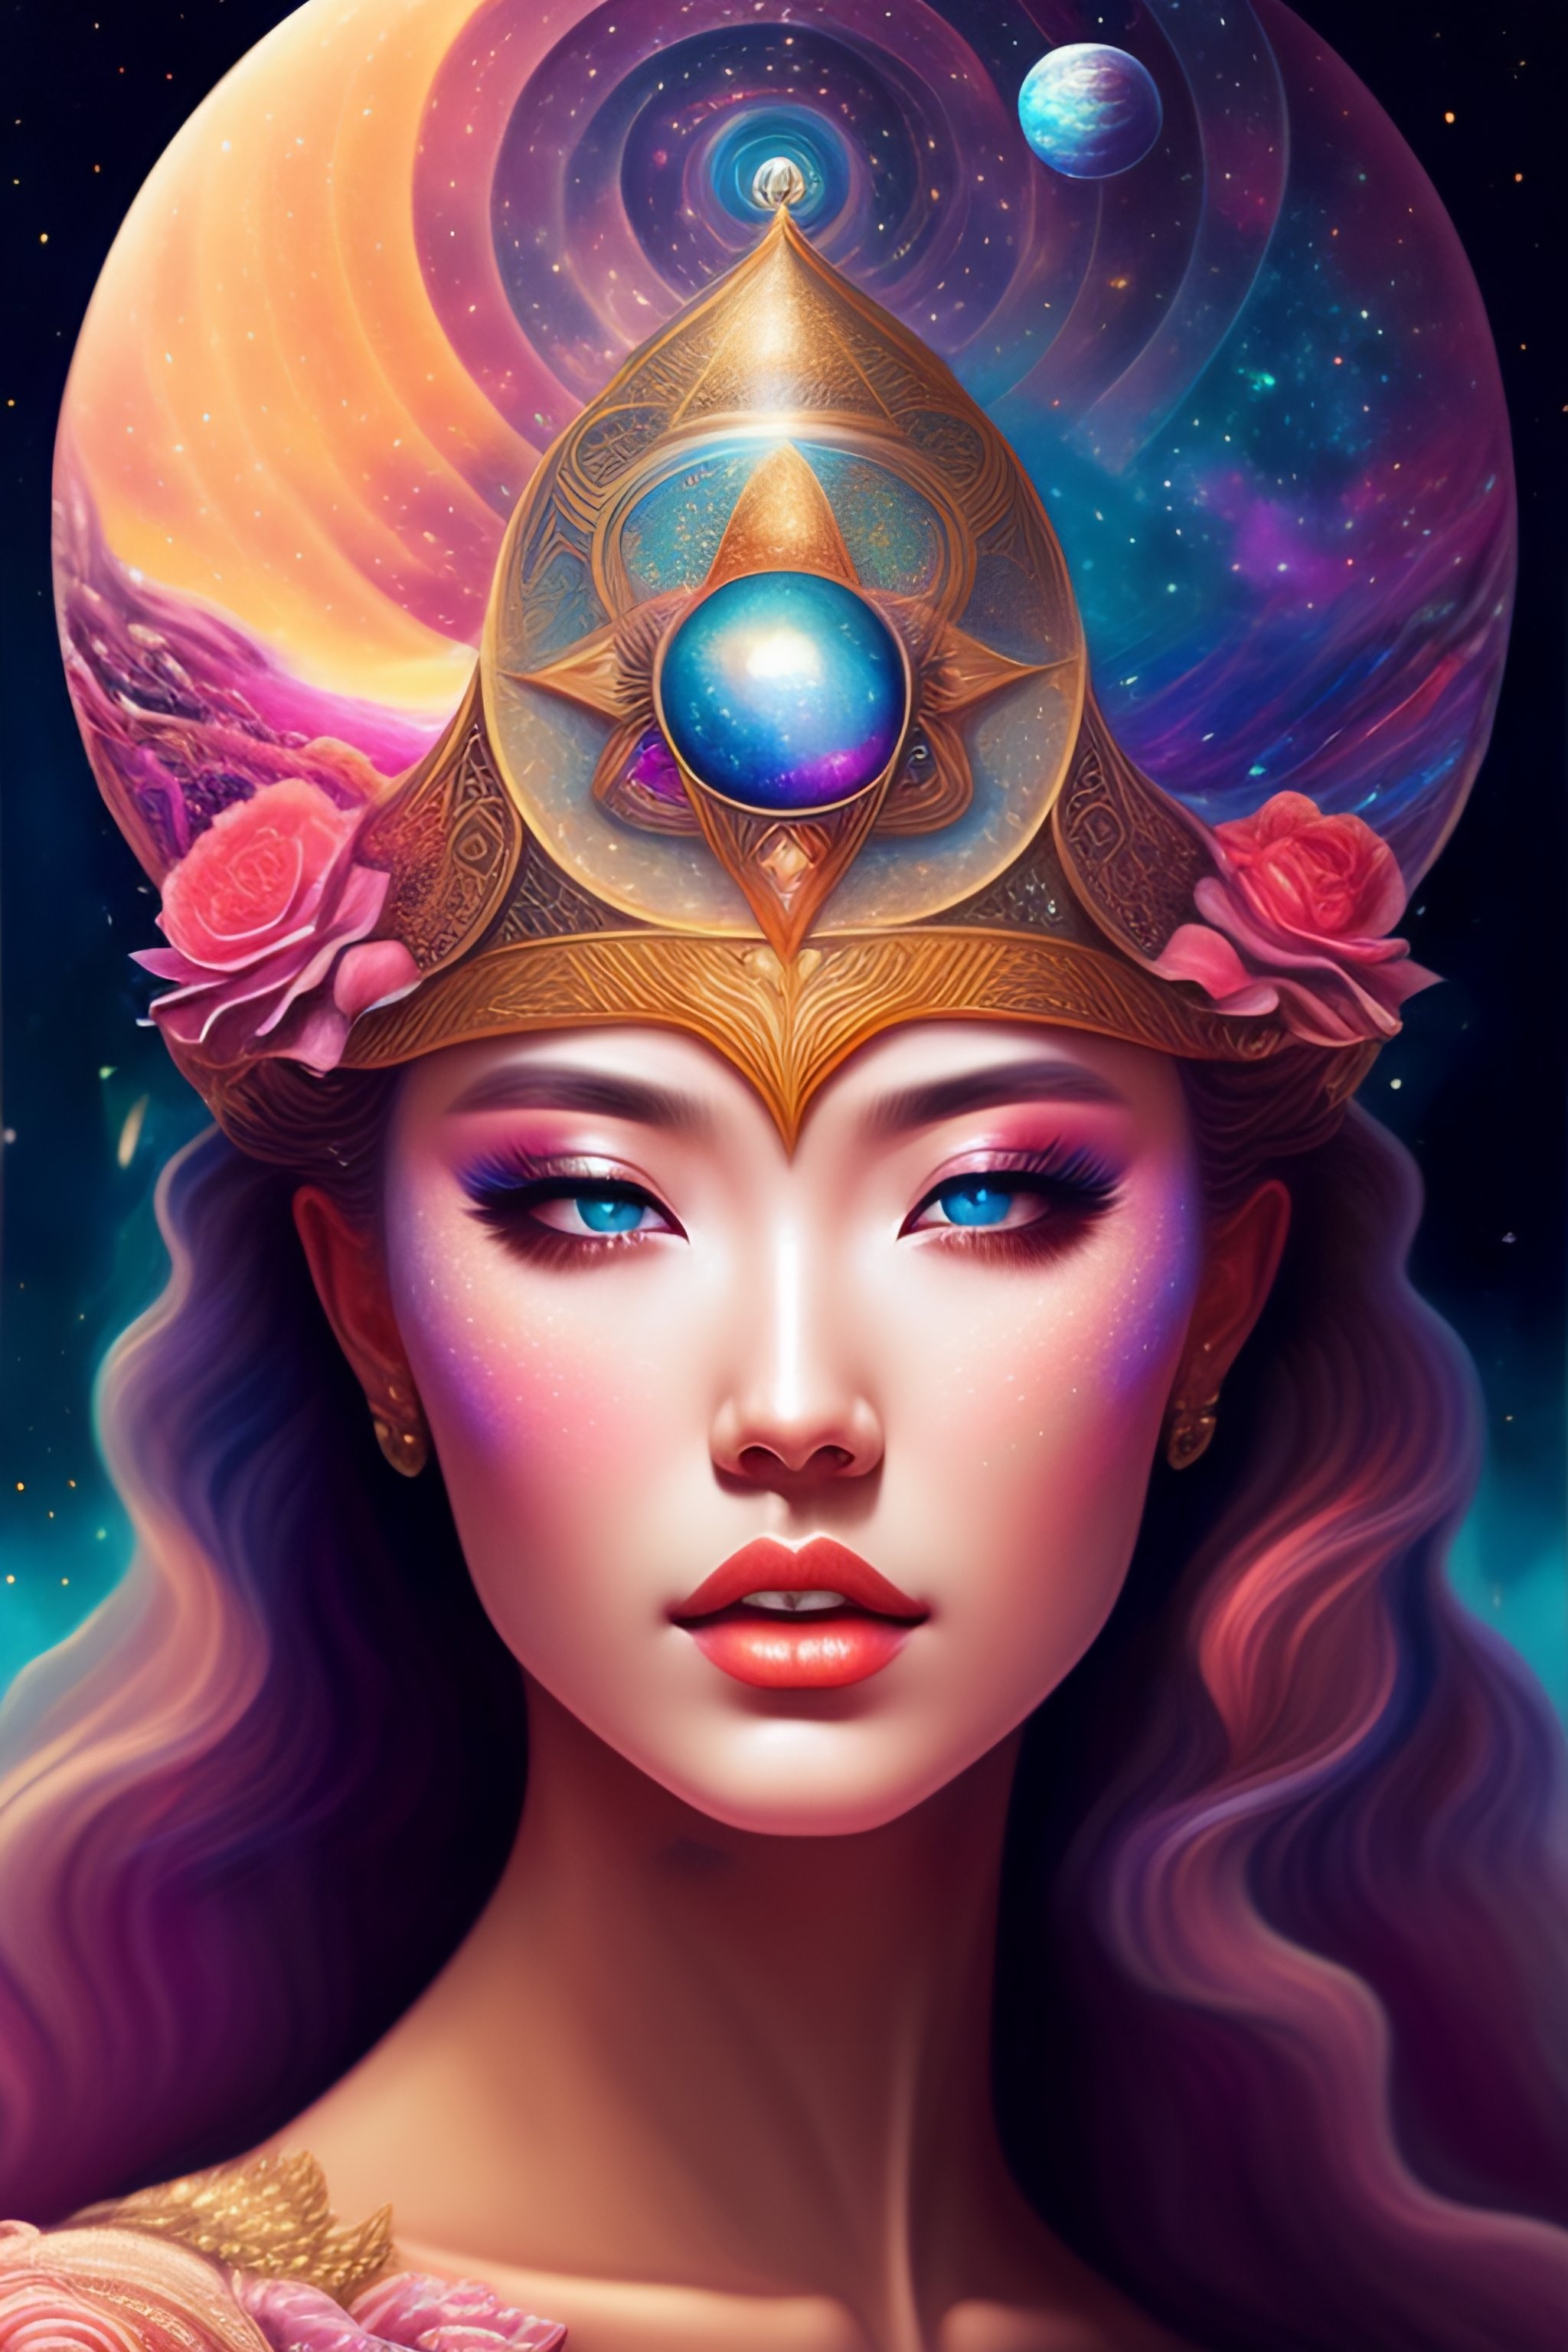 Lexica - You are the universe experiencing itself., universe fulfilling ...